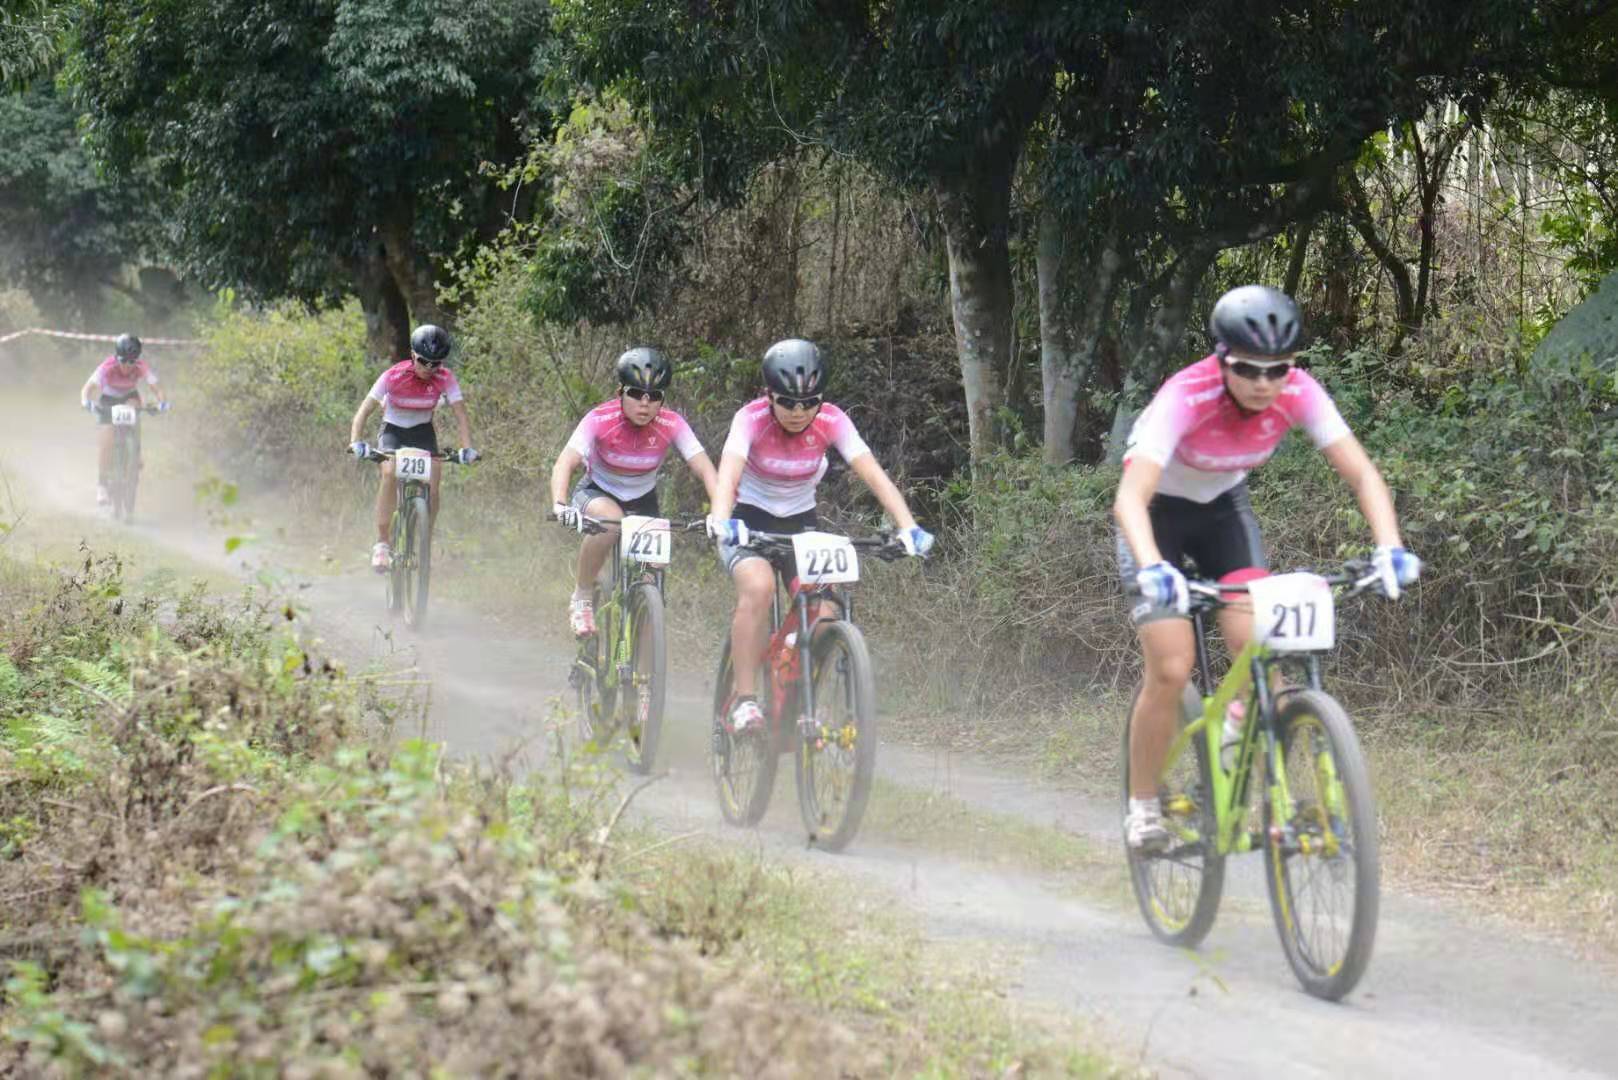 Cycling cultural festival opens at Haikou volcano park